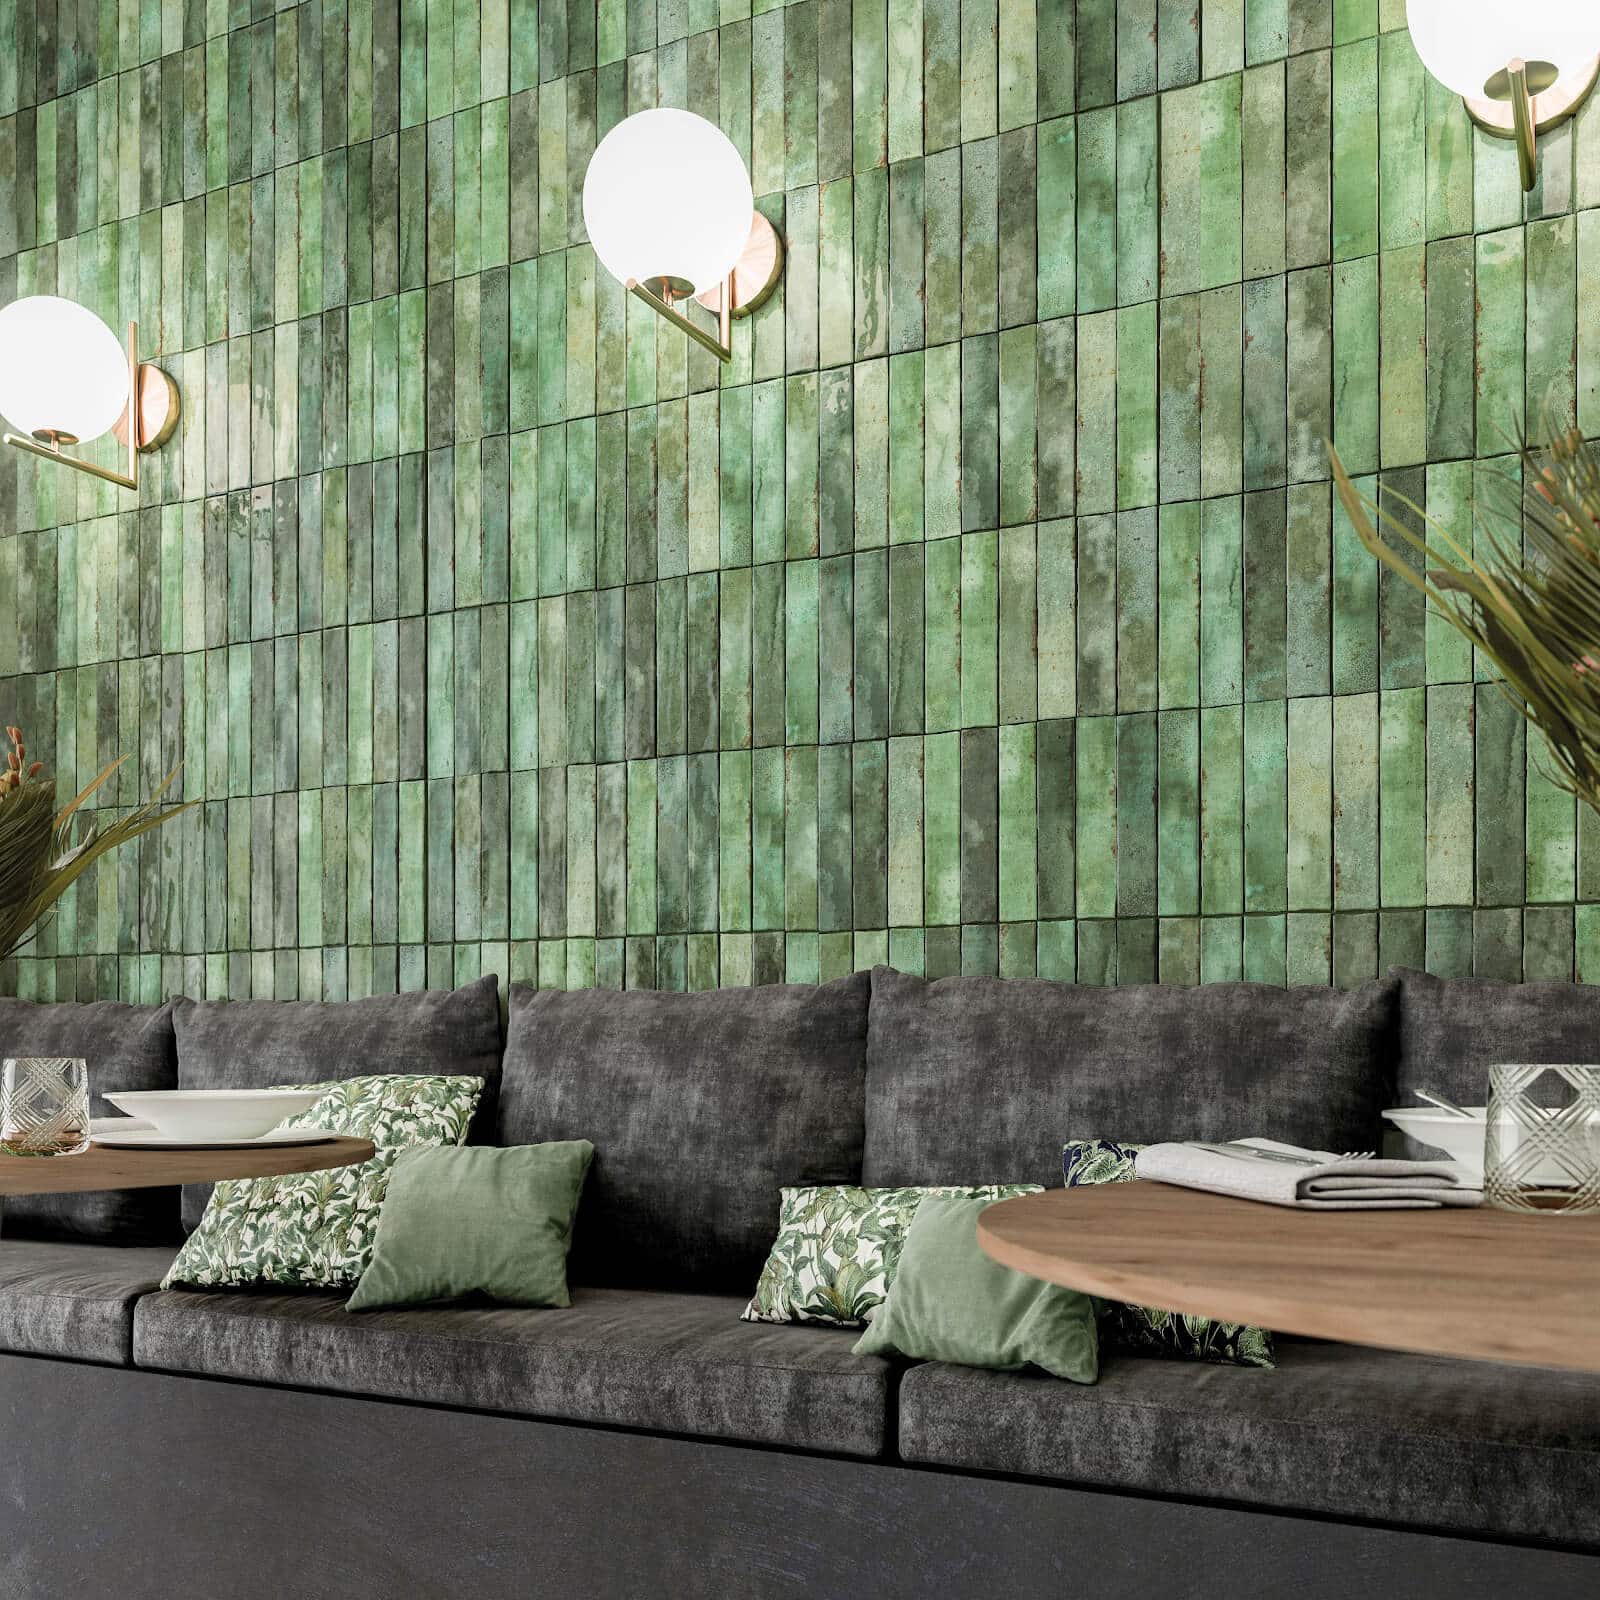 Variegated green wall tile in a vertical grid